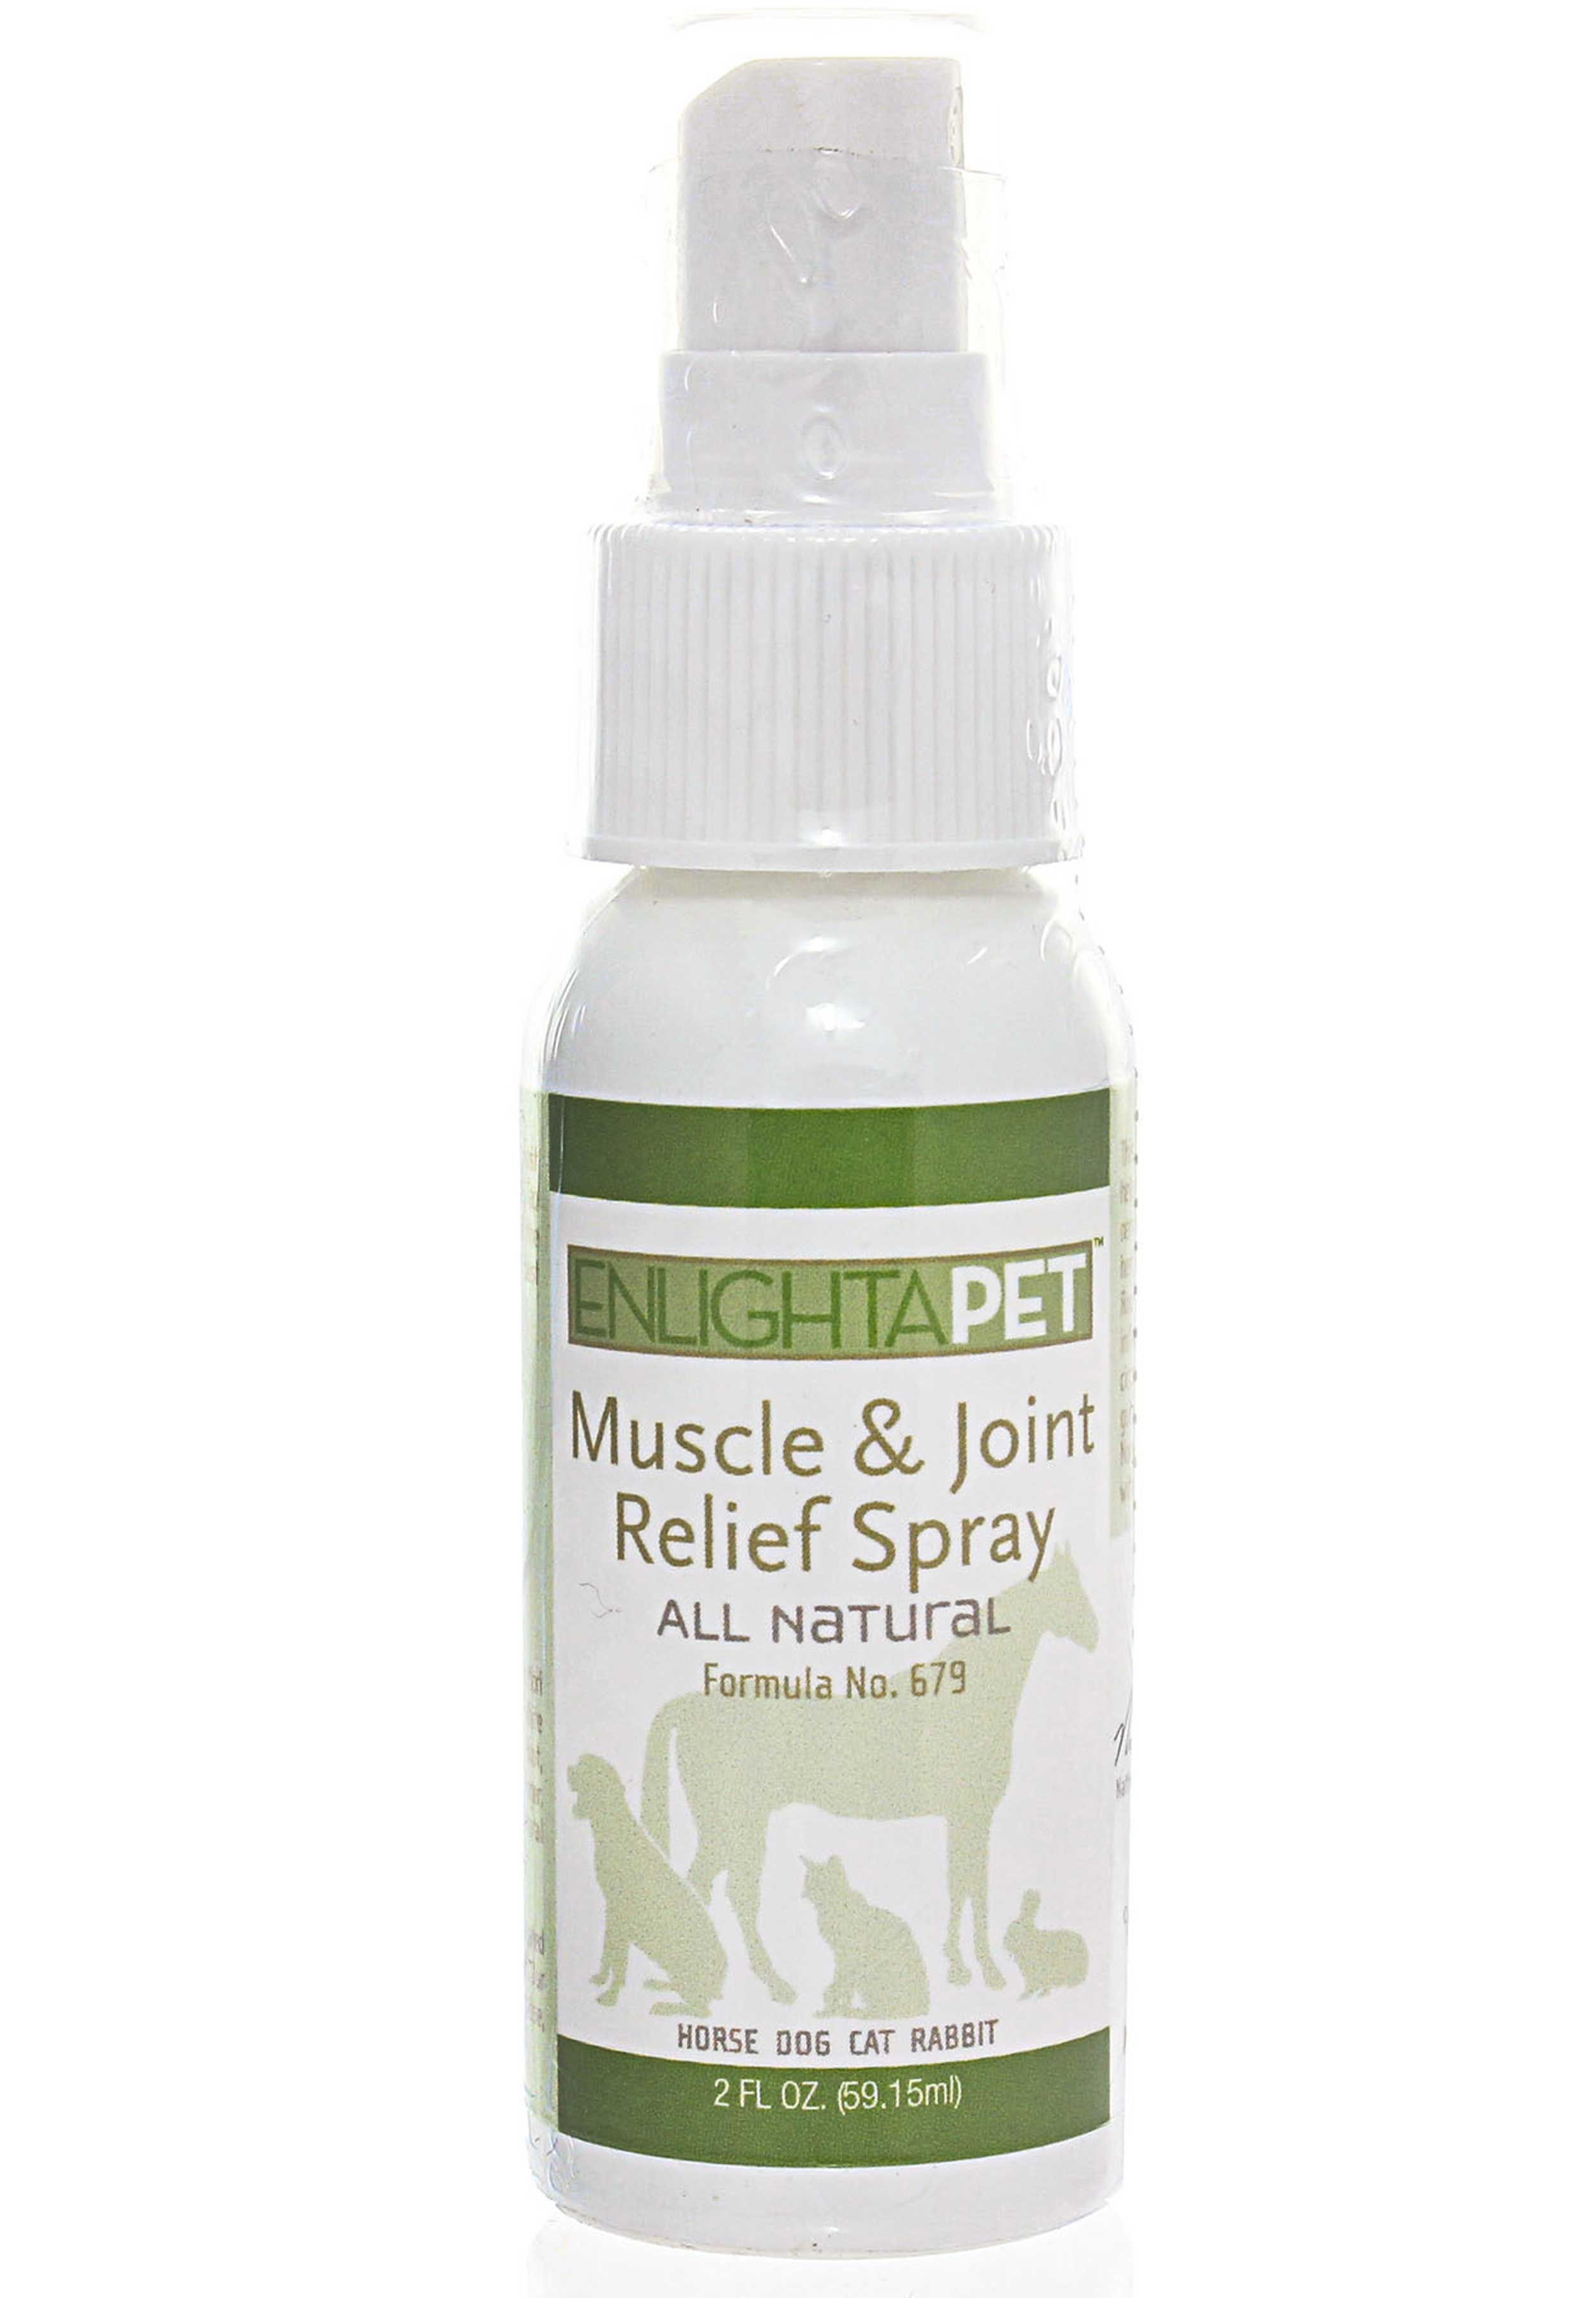 Jadience Herbal Formulas EnlightAPet Muscle and Joint Pain Relief Spray All Natural